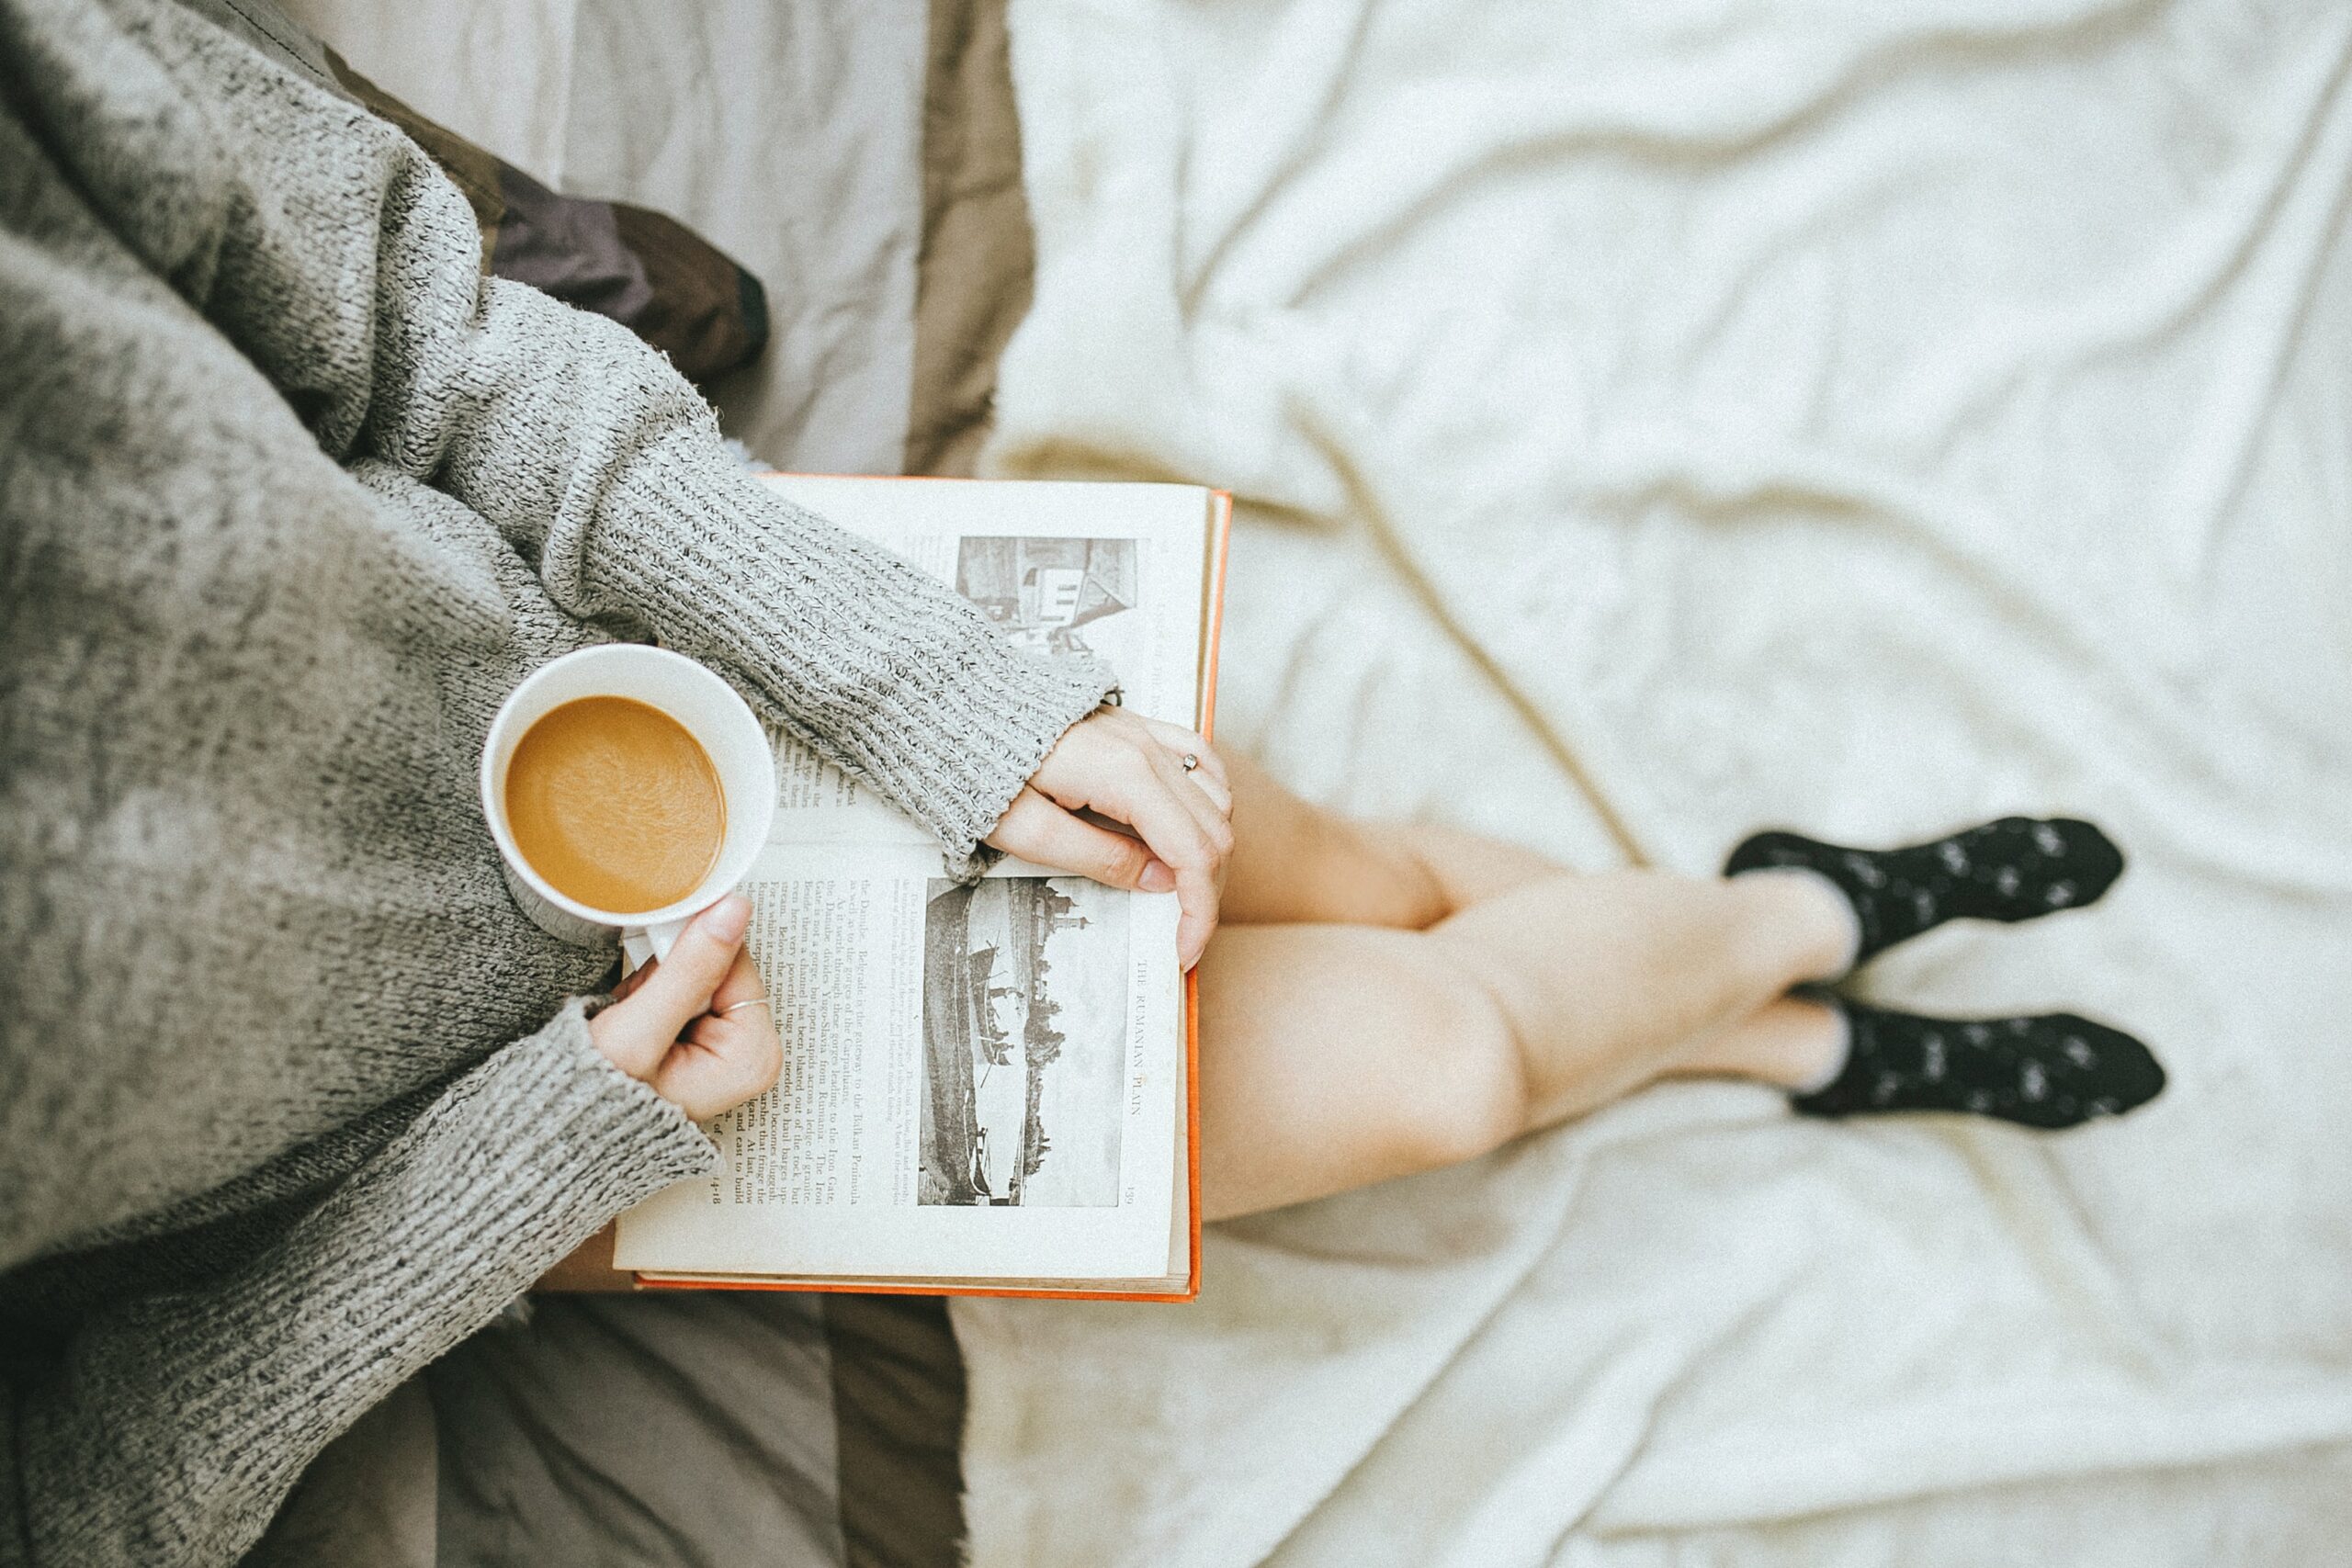 An image of a lady reading a book and drinking coffee while laying in her bed.